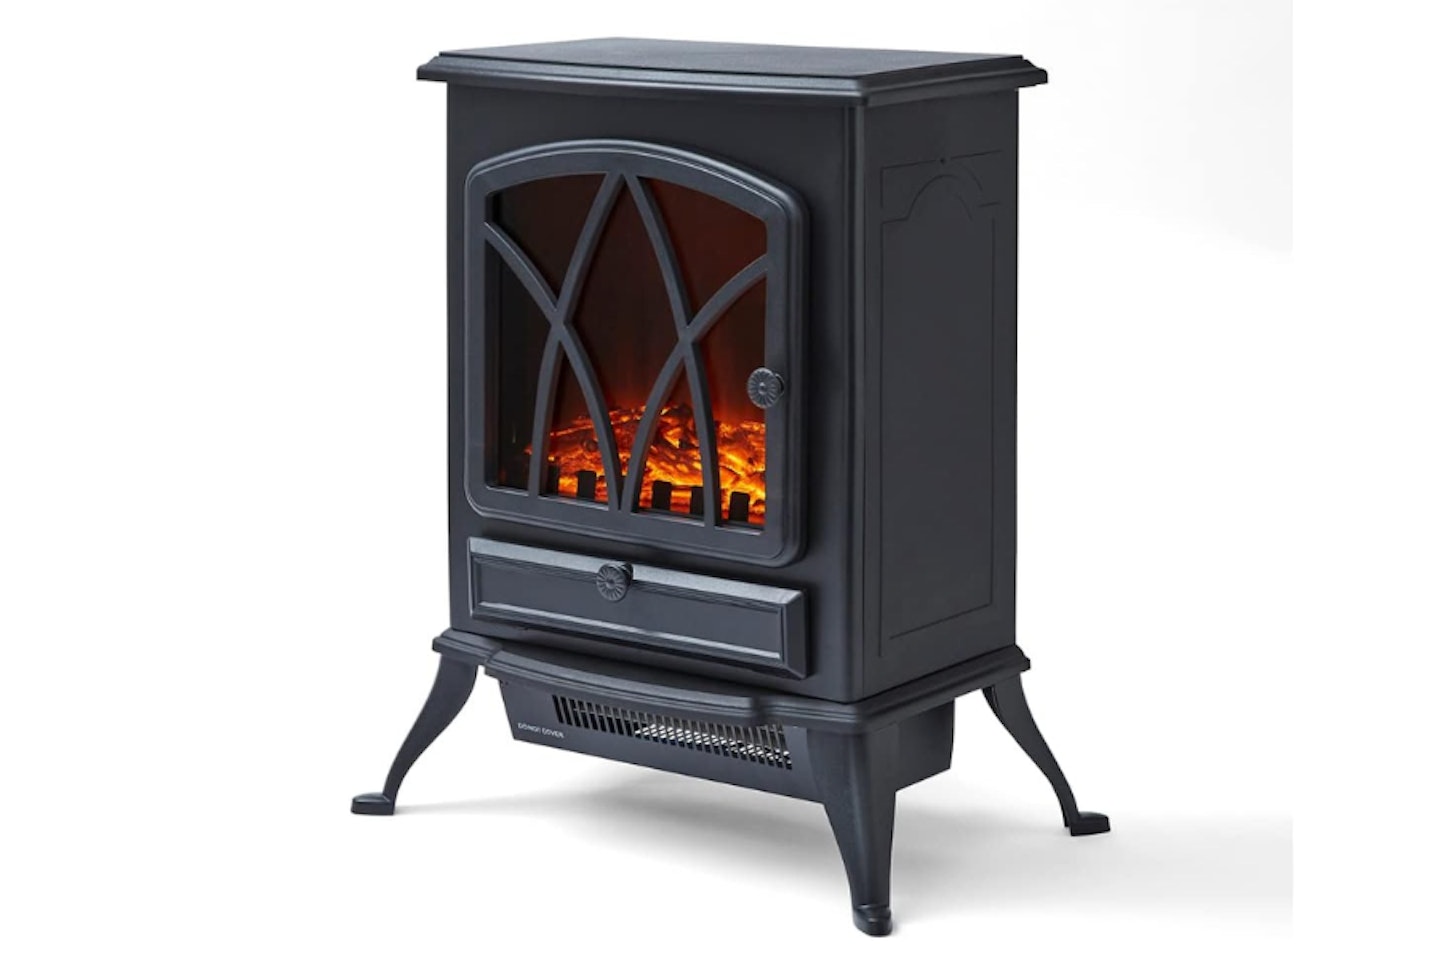 Warmlite WL46018 Stirling Portable Electric Fire Stove Heater with Realistic LED Flame Effect